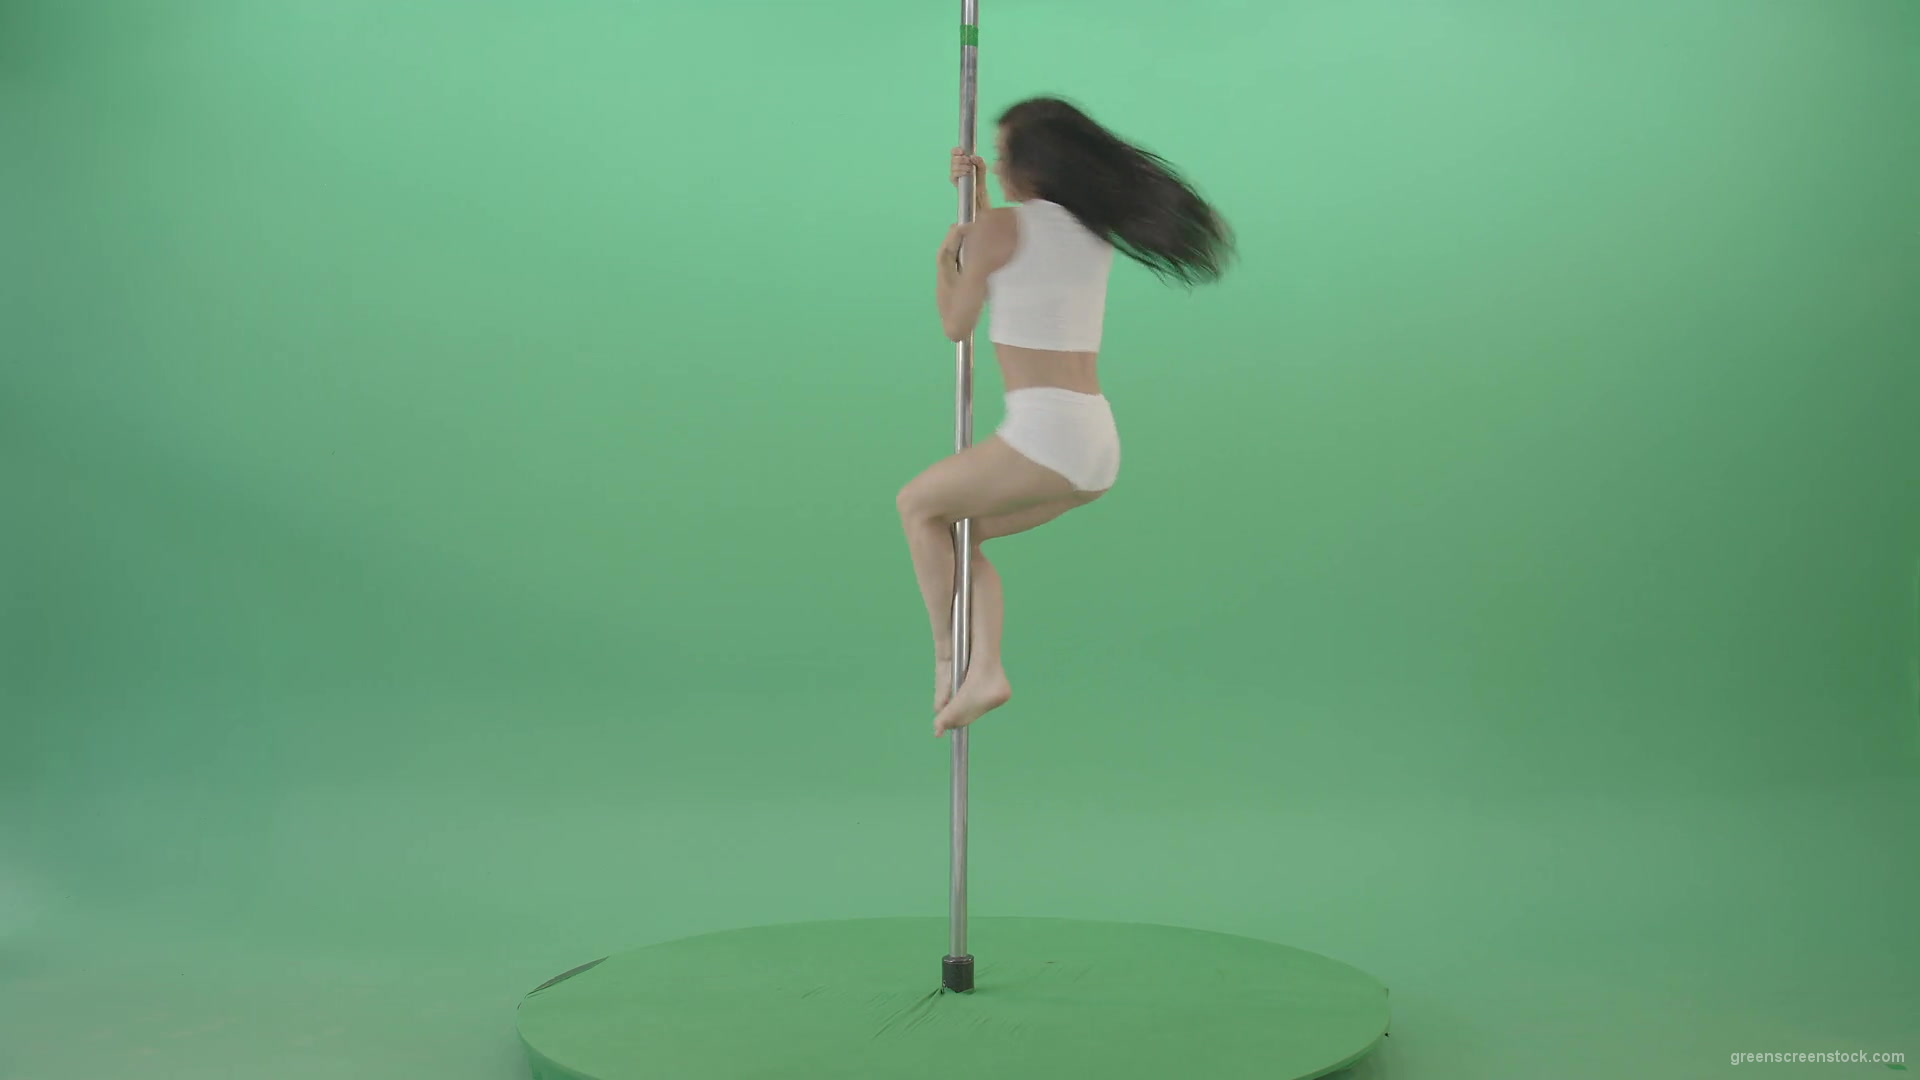 Sport-Fit-Girl-spinning-on-pole-making-acrobatic-element-on-green-screen-1920_004 Green Screen Stock